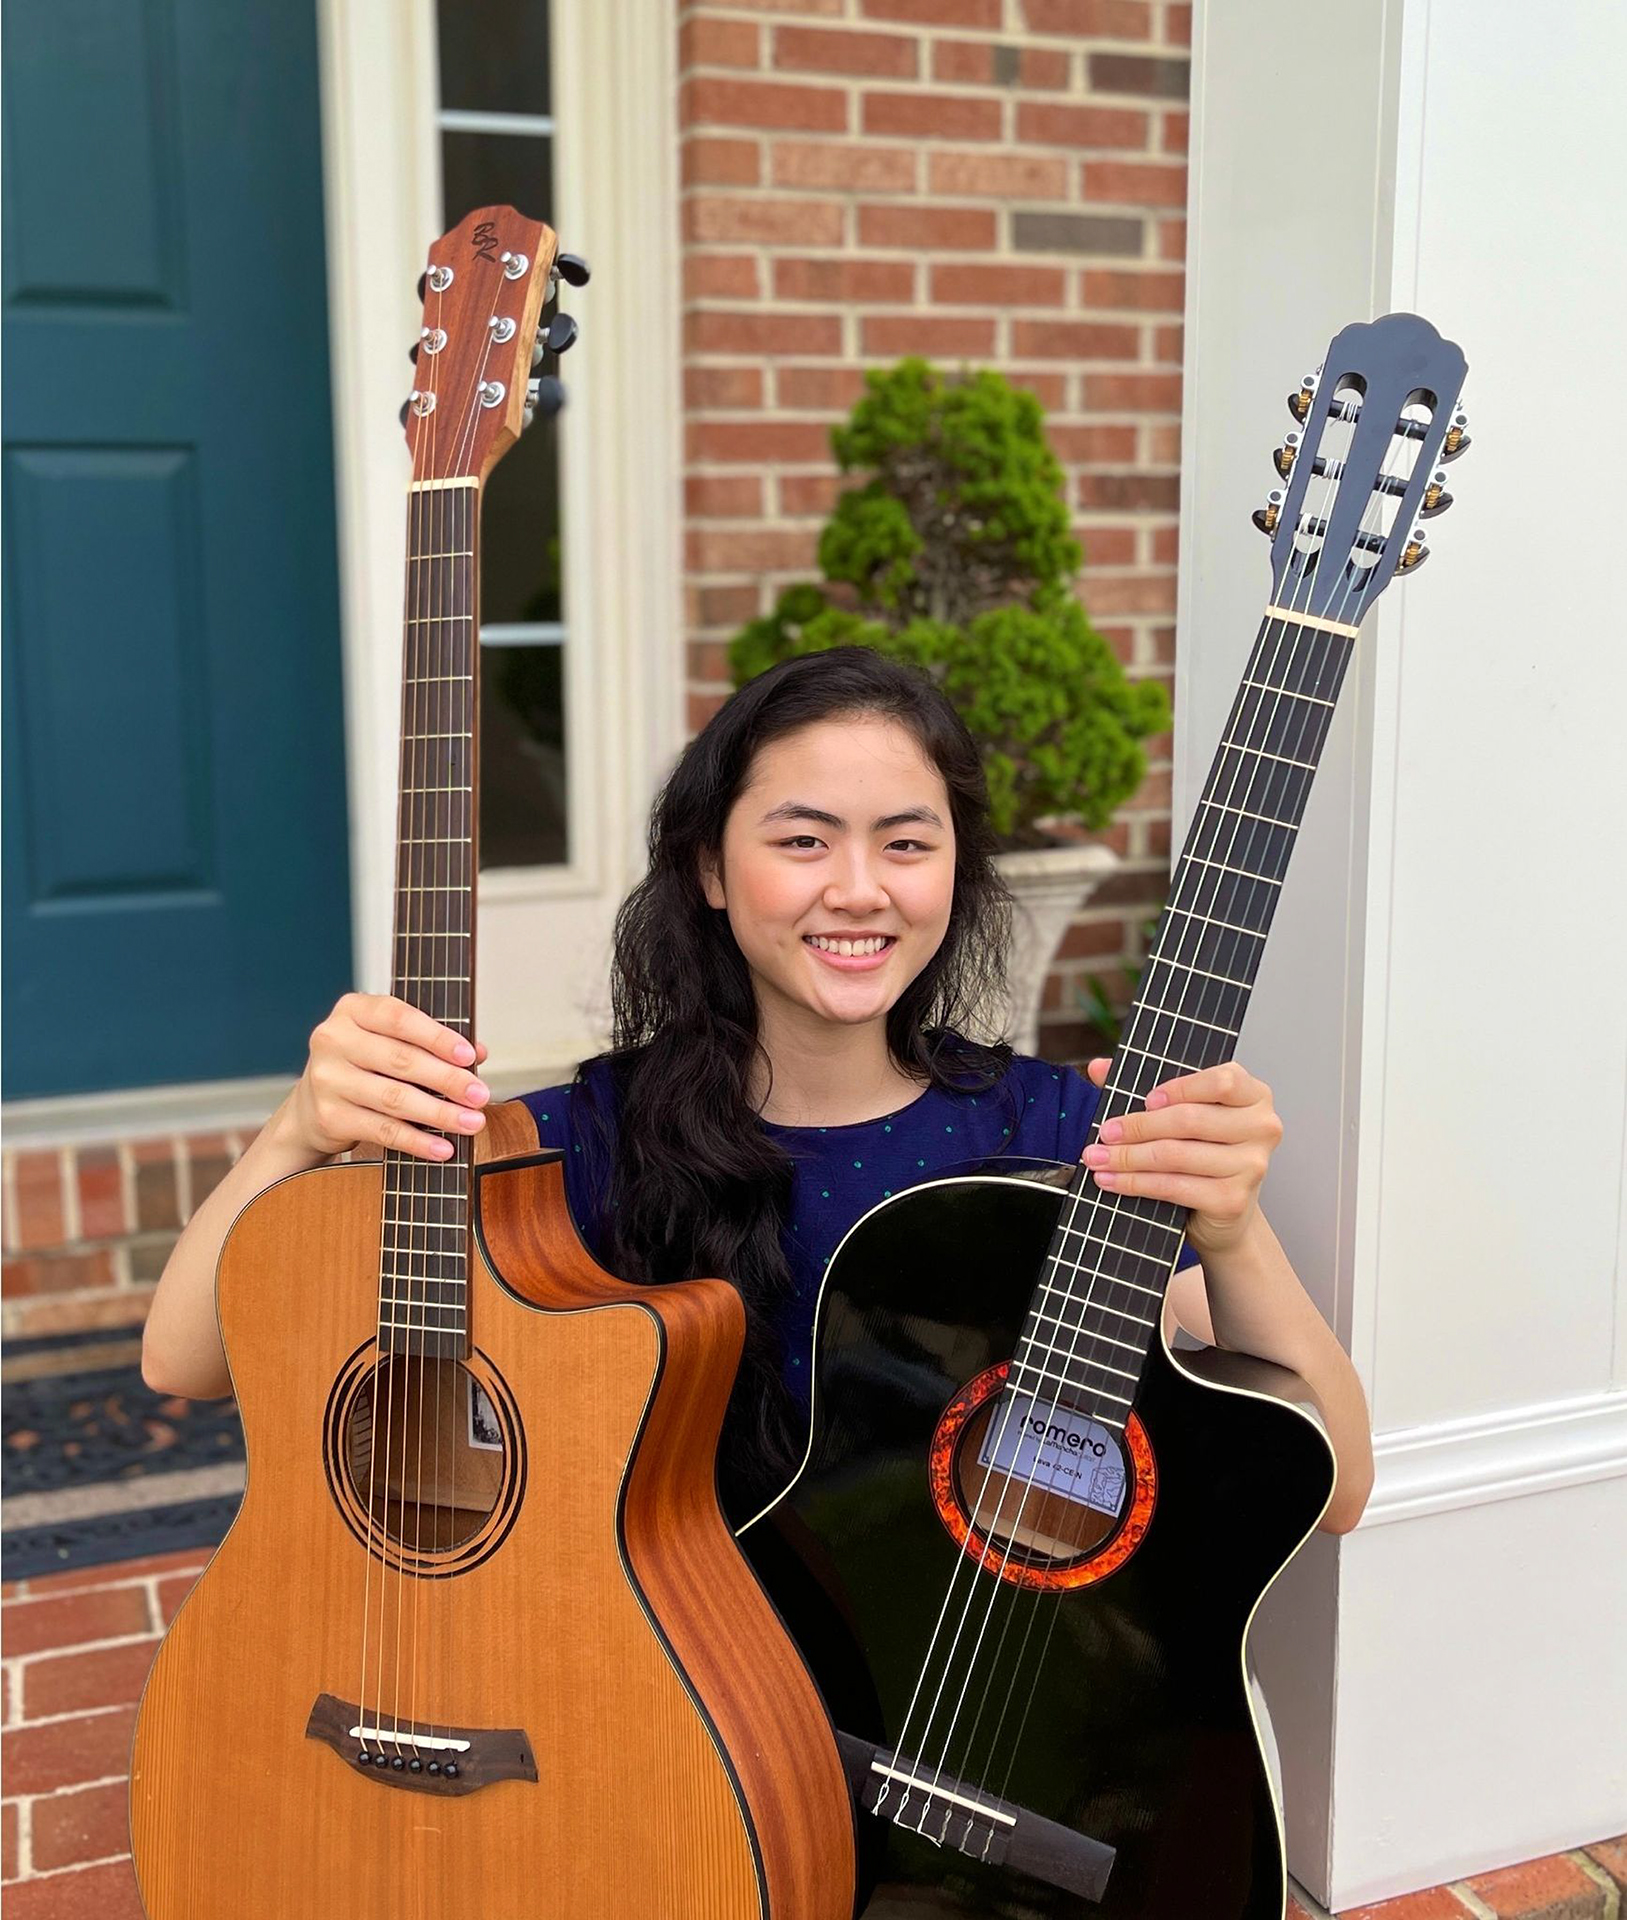  Lauren Young plays fingerstyle guitar and loves learning and arranging songs by ear. 